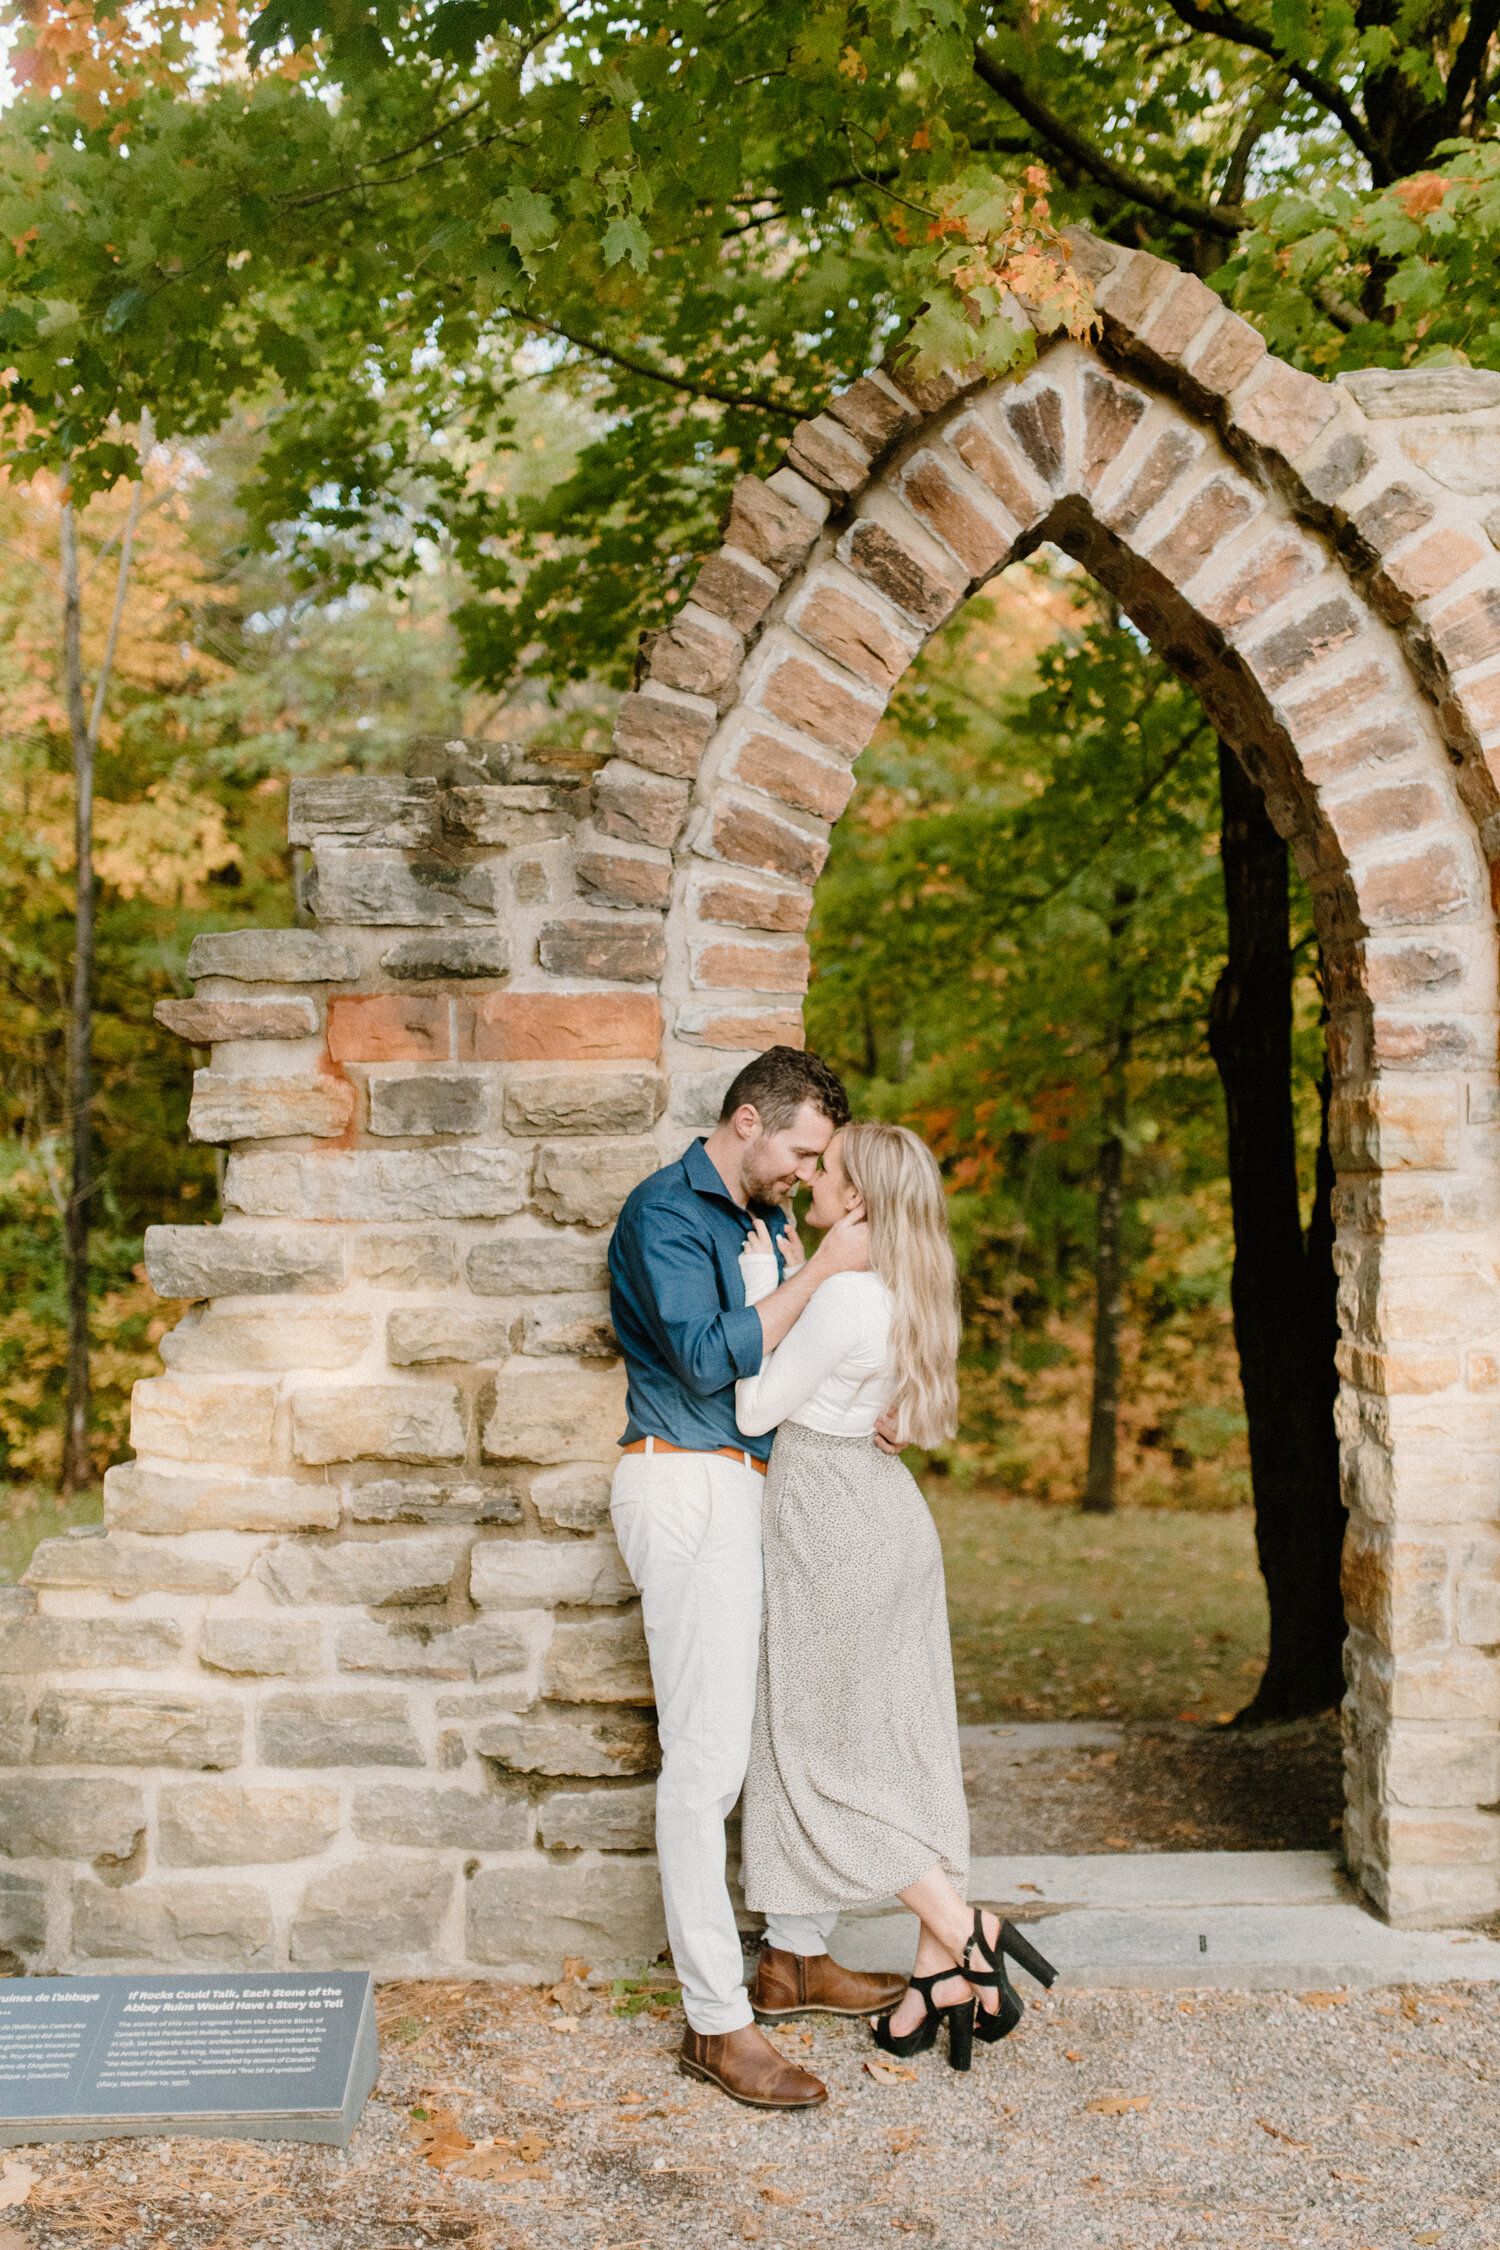  Posed against a beautiful brick archway, Quebec, Canada photographer, Chelsea Mason Photography captures this bride and groom kissing during their engagement session. brick garden archway, romantic quebec canada engagement photographer, neutral enga